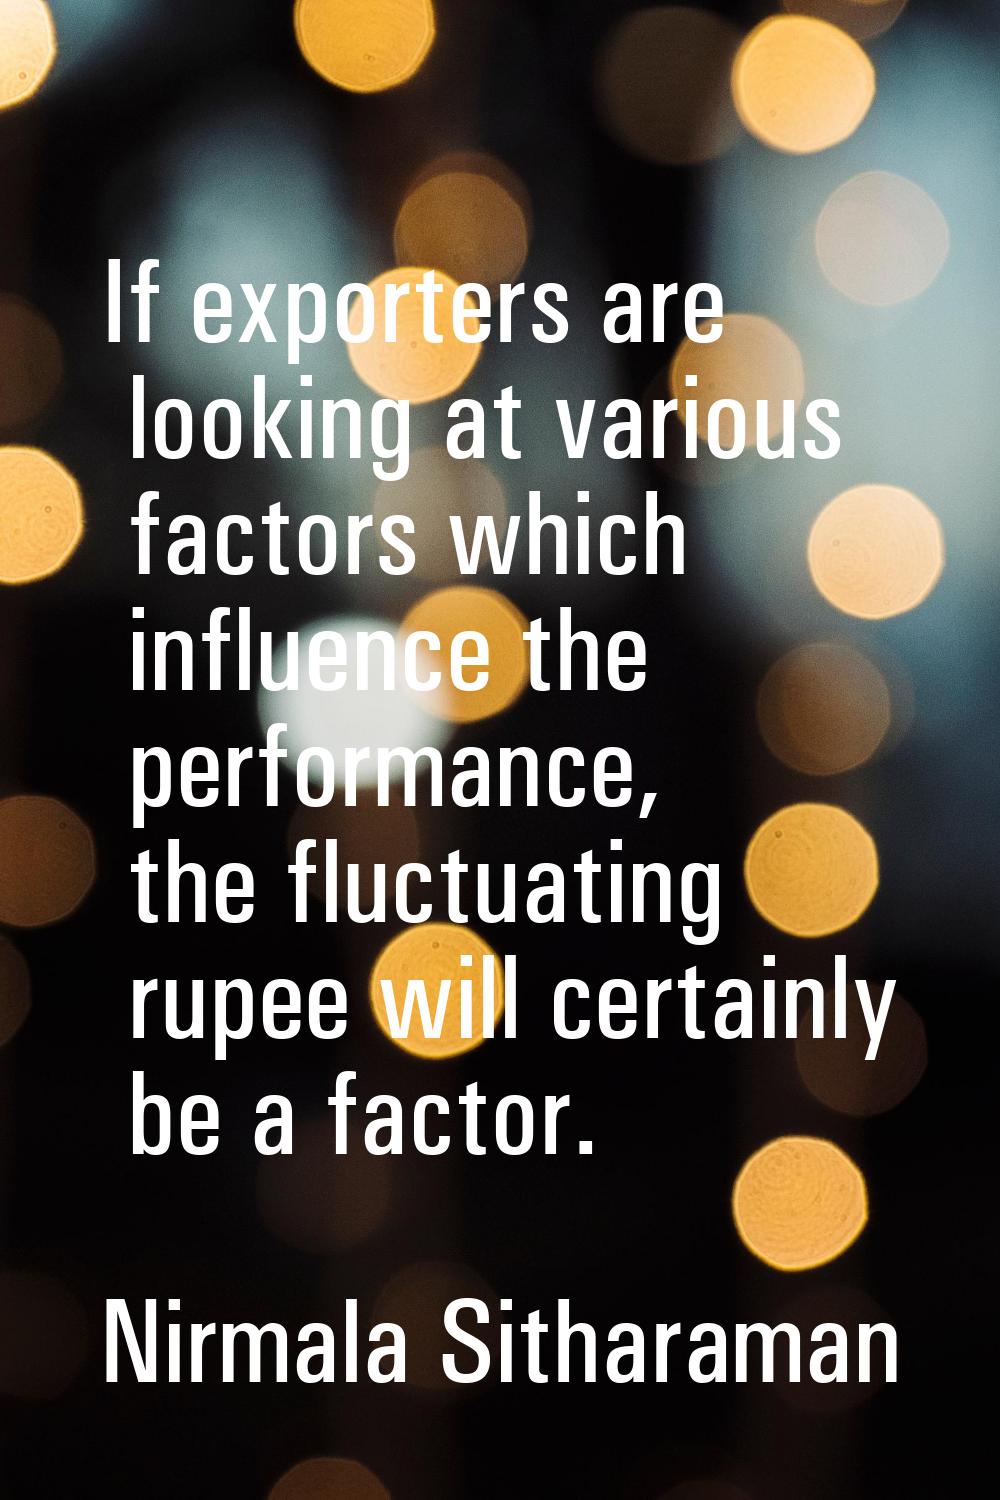 If exporters are looking at various factors which influence the performance, the fluctuating rupee 